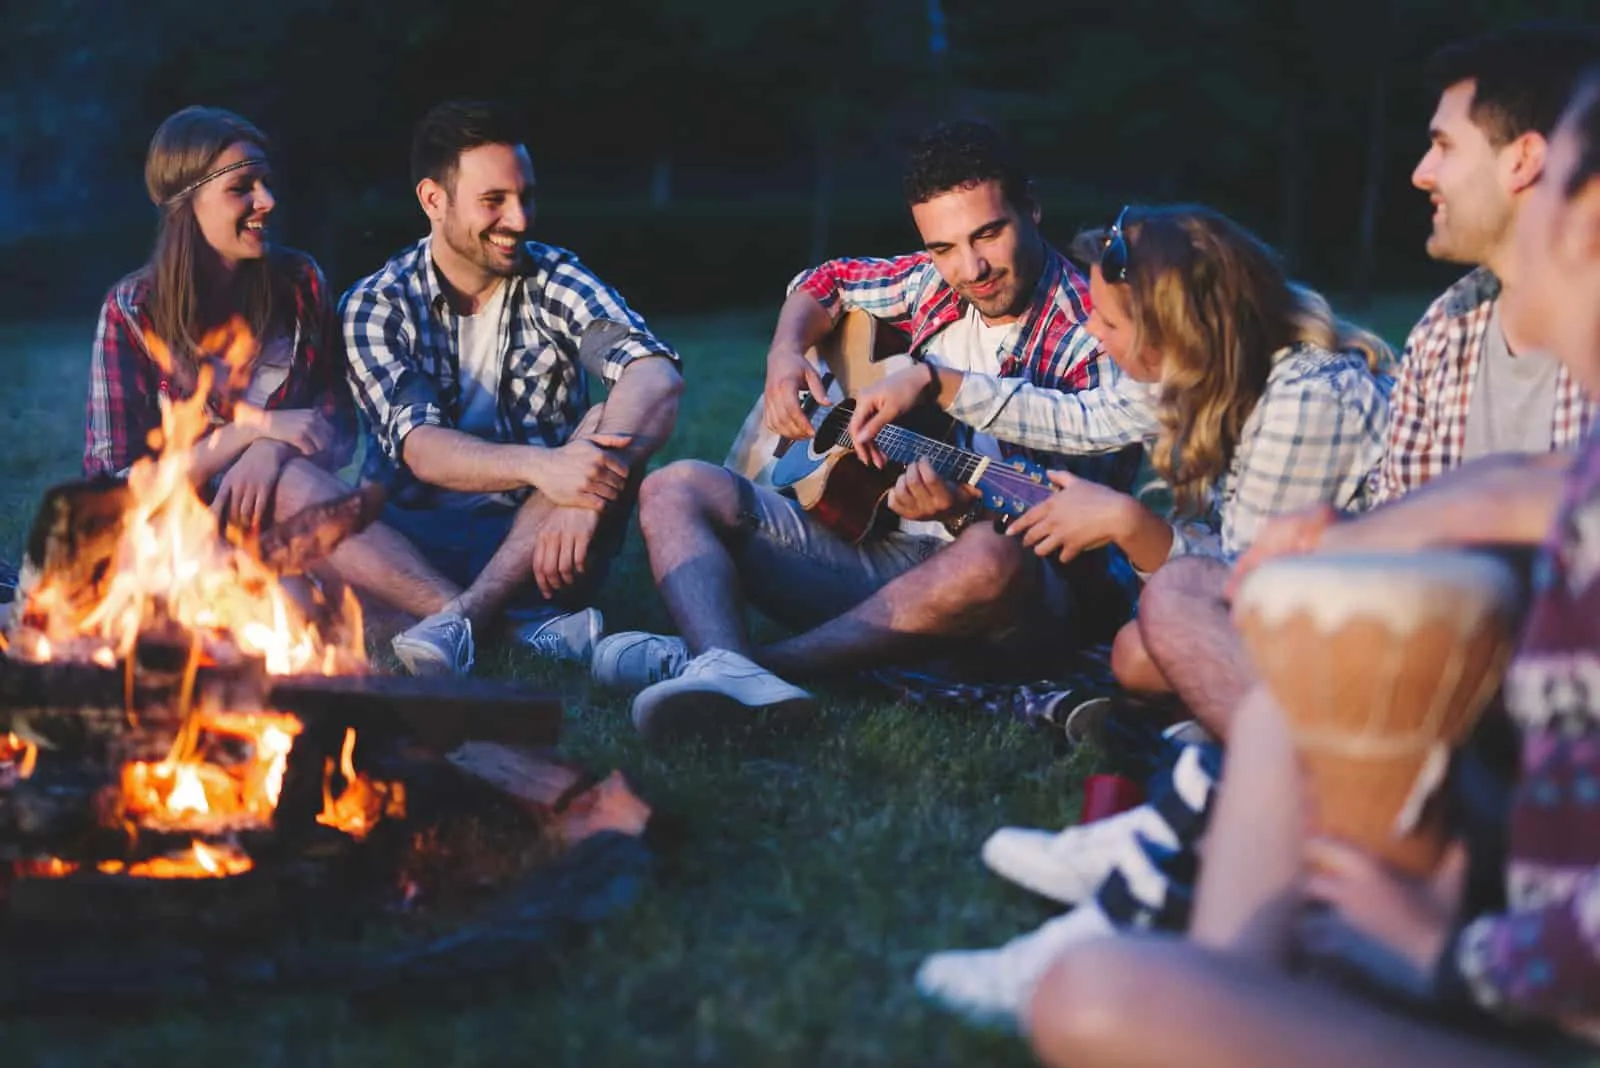 gemini man testing girlfriend's social skills while being on bonfire with friends